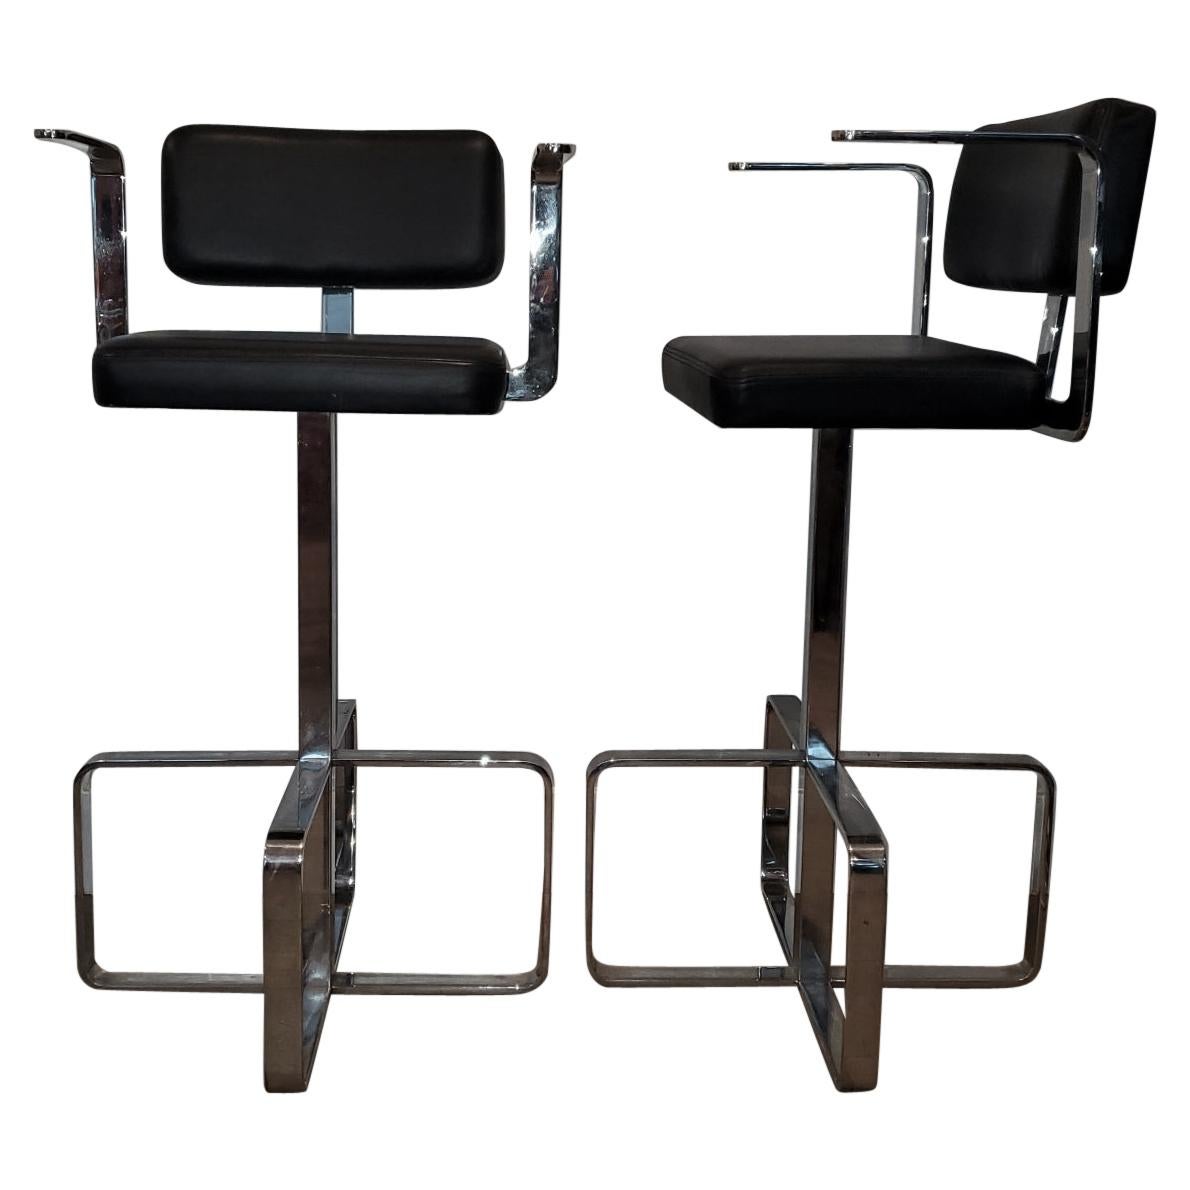 Pair of Italian 1980s Modern Contemporary Swivel Chrome Leather Bar Stools For Sale